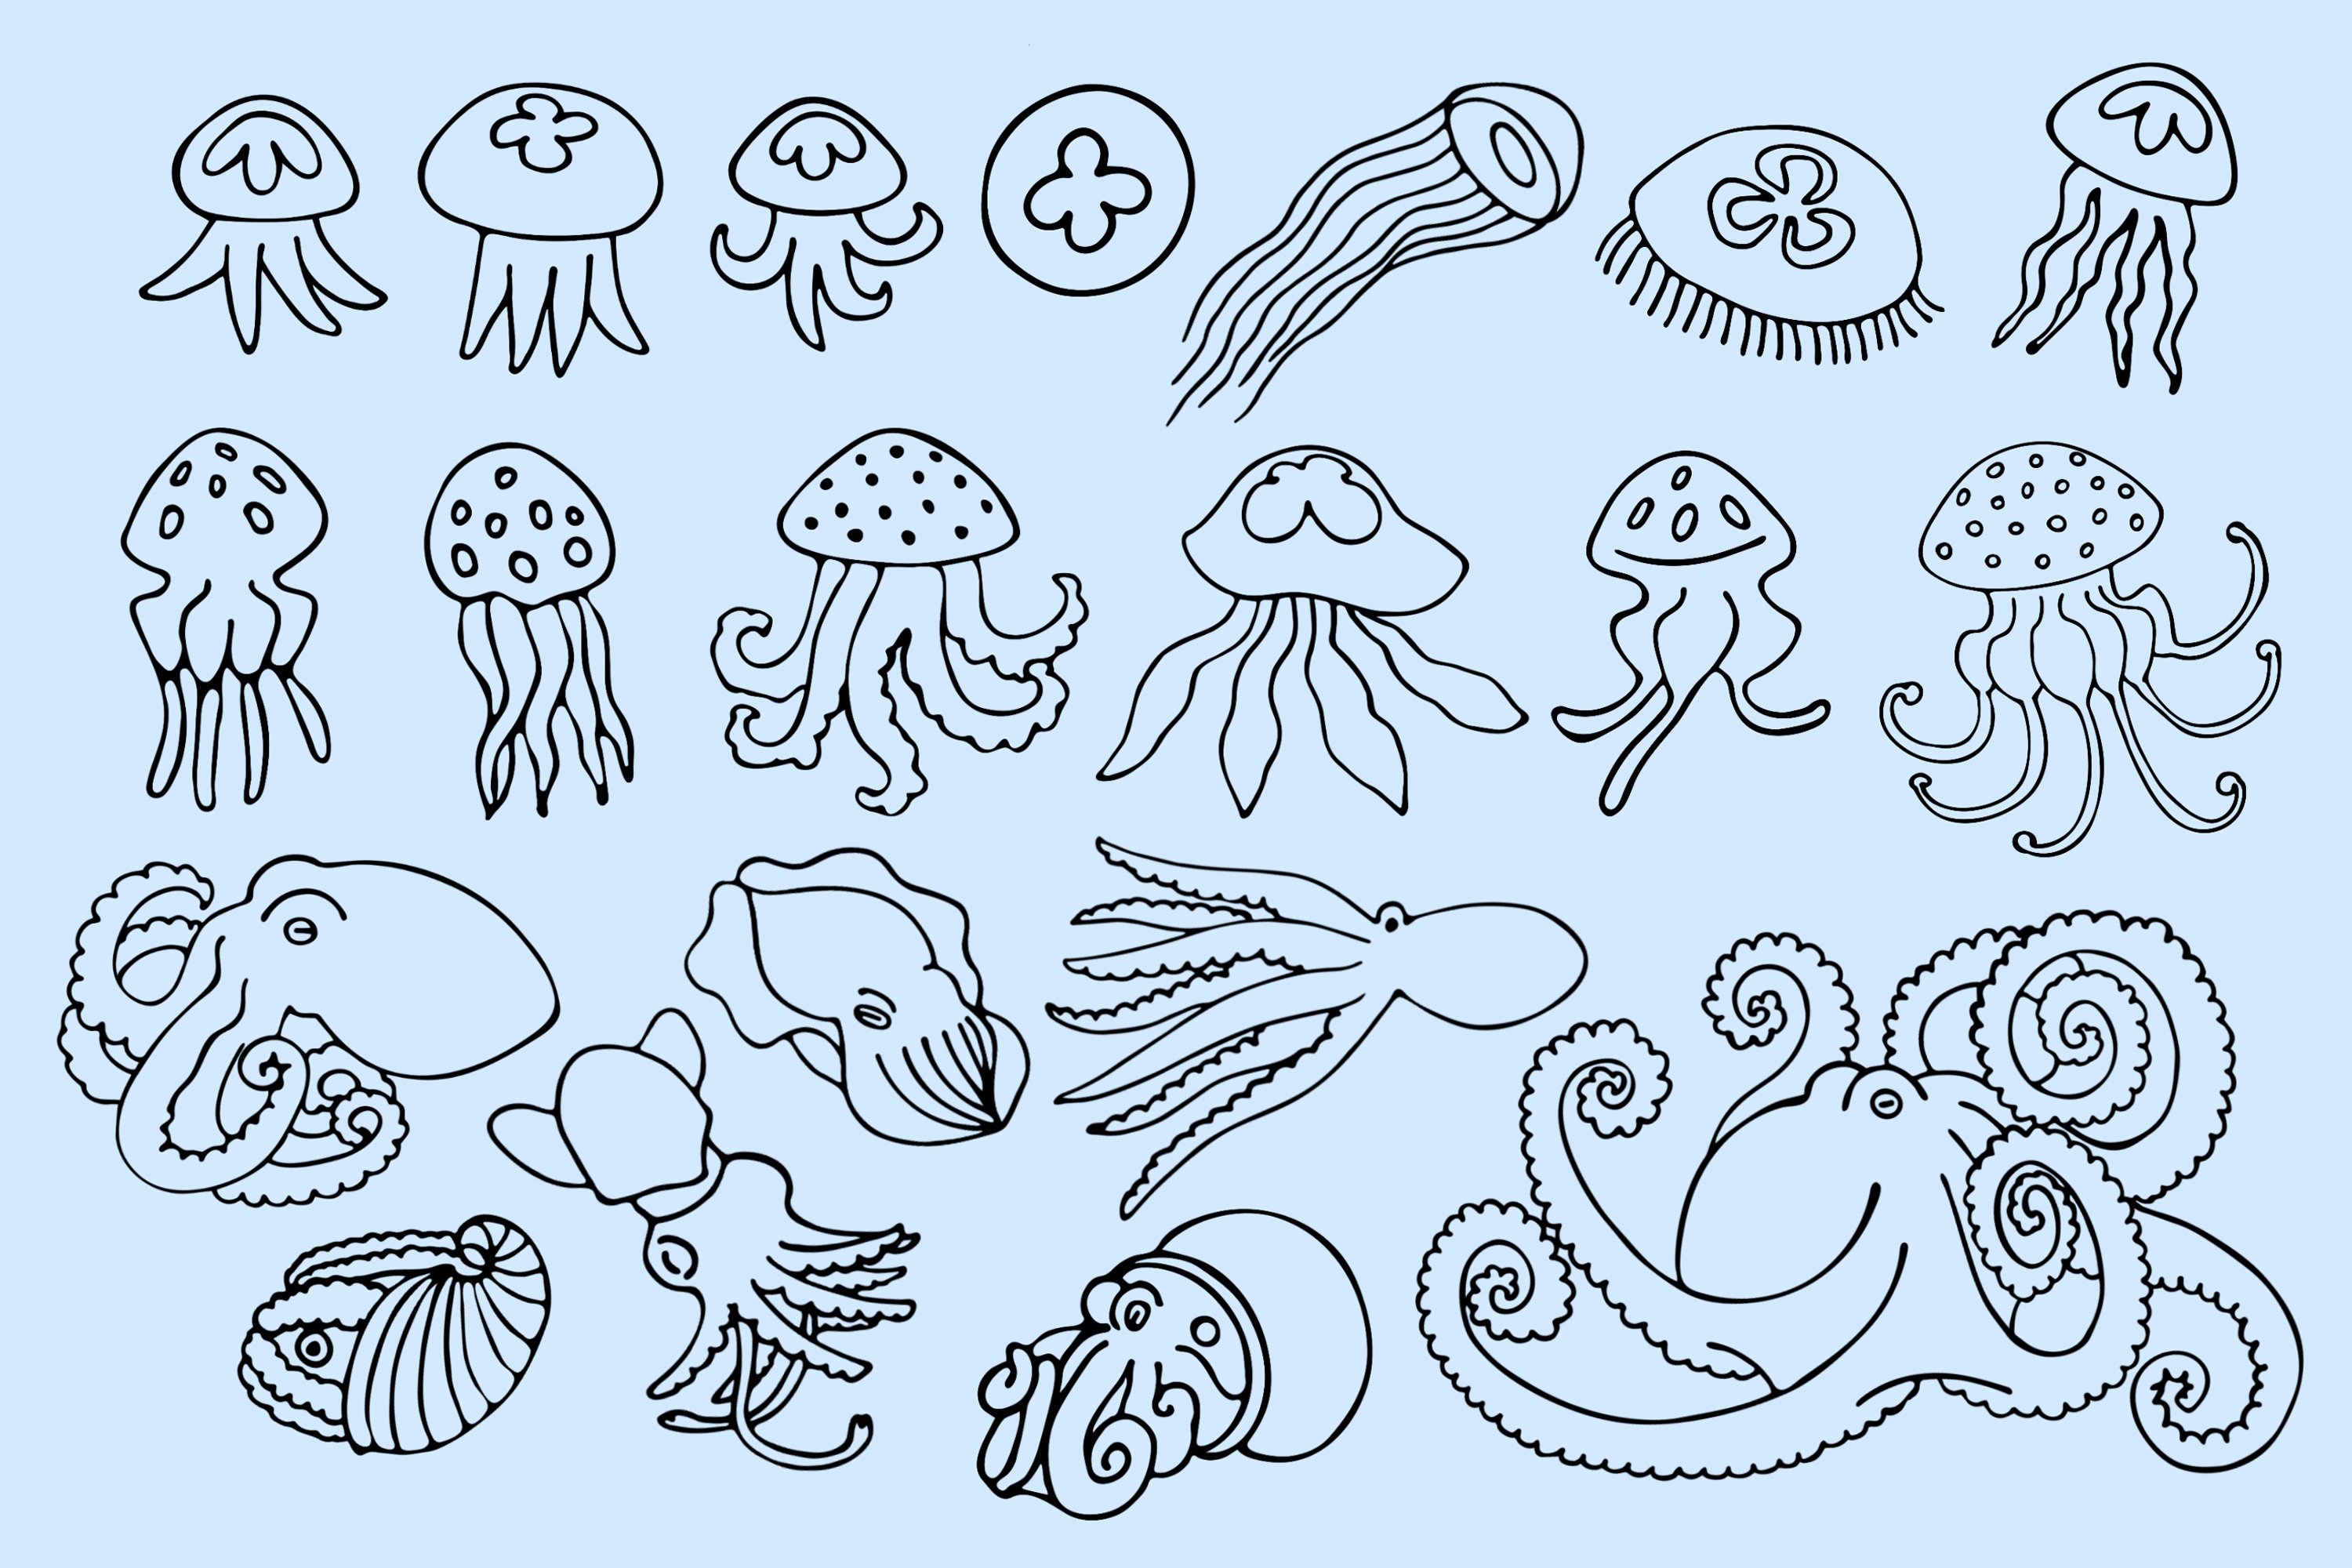 Diverse of the octopuses and jellyfishes.